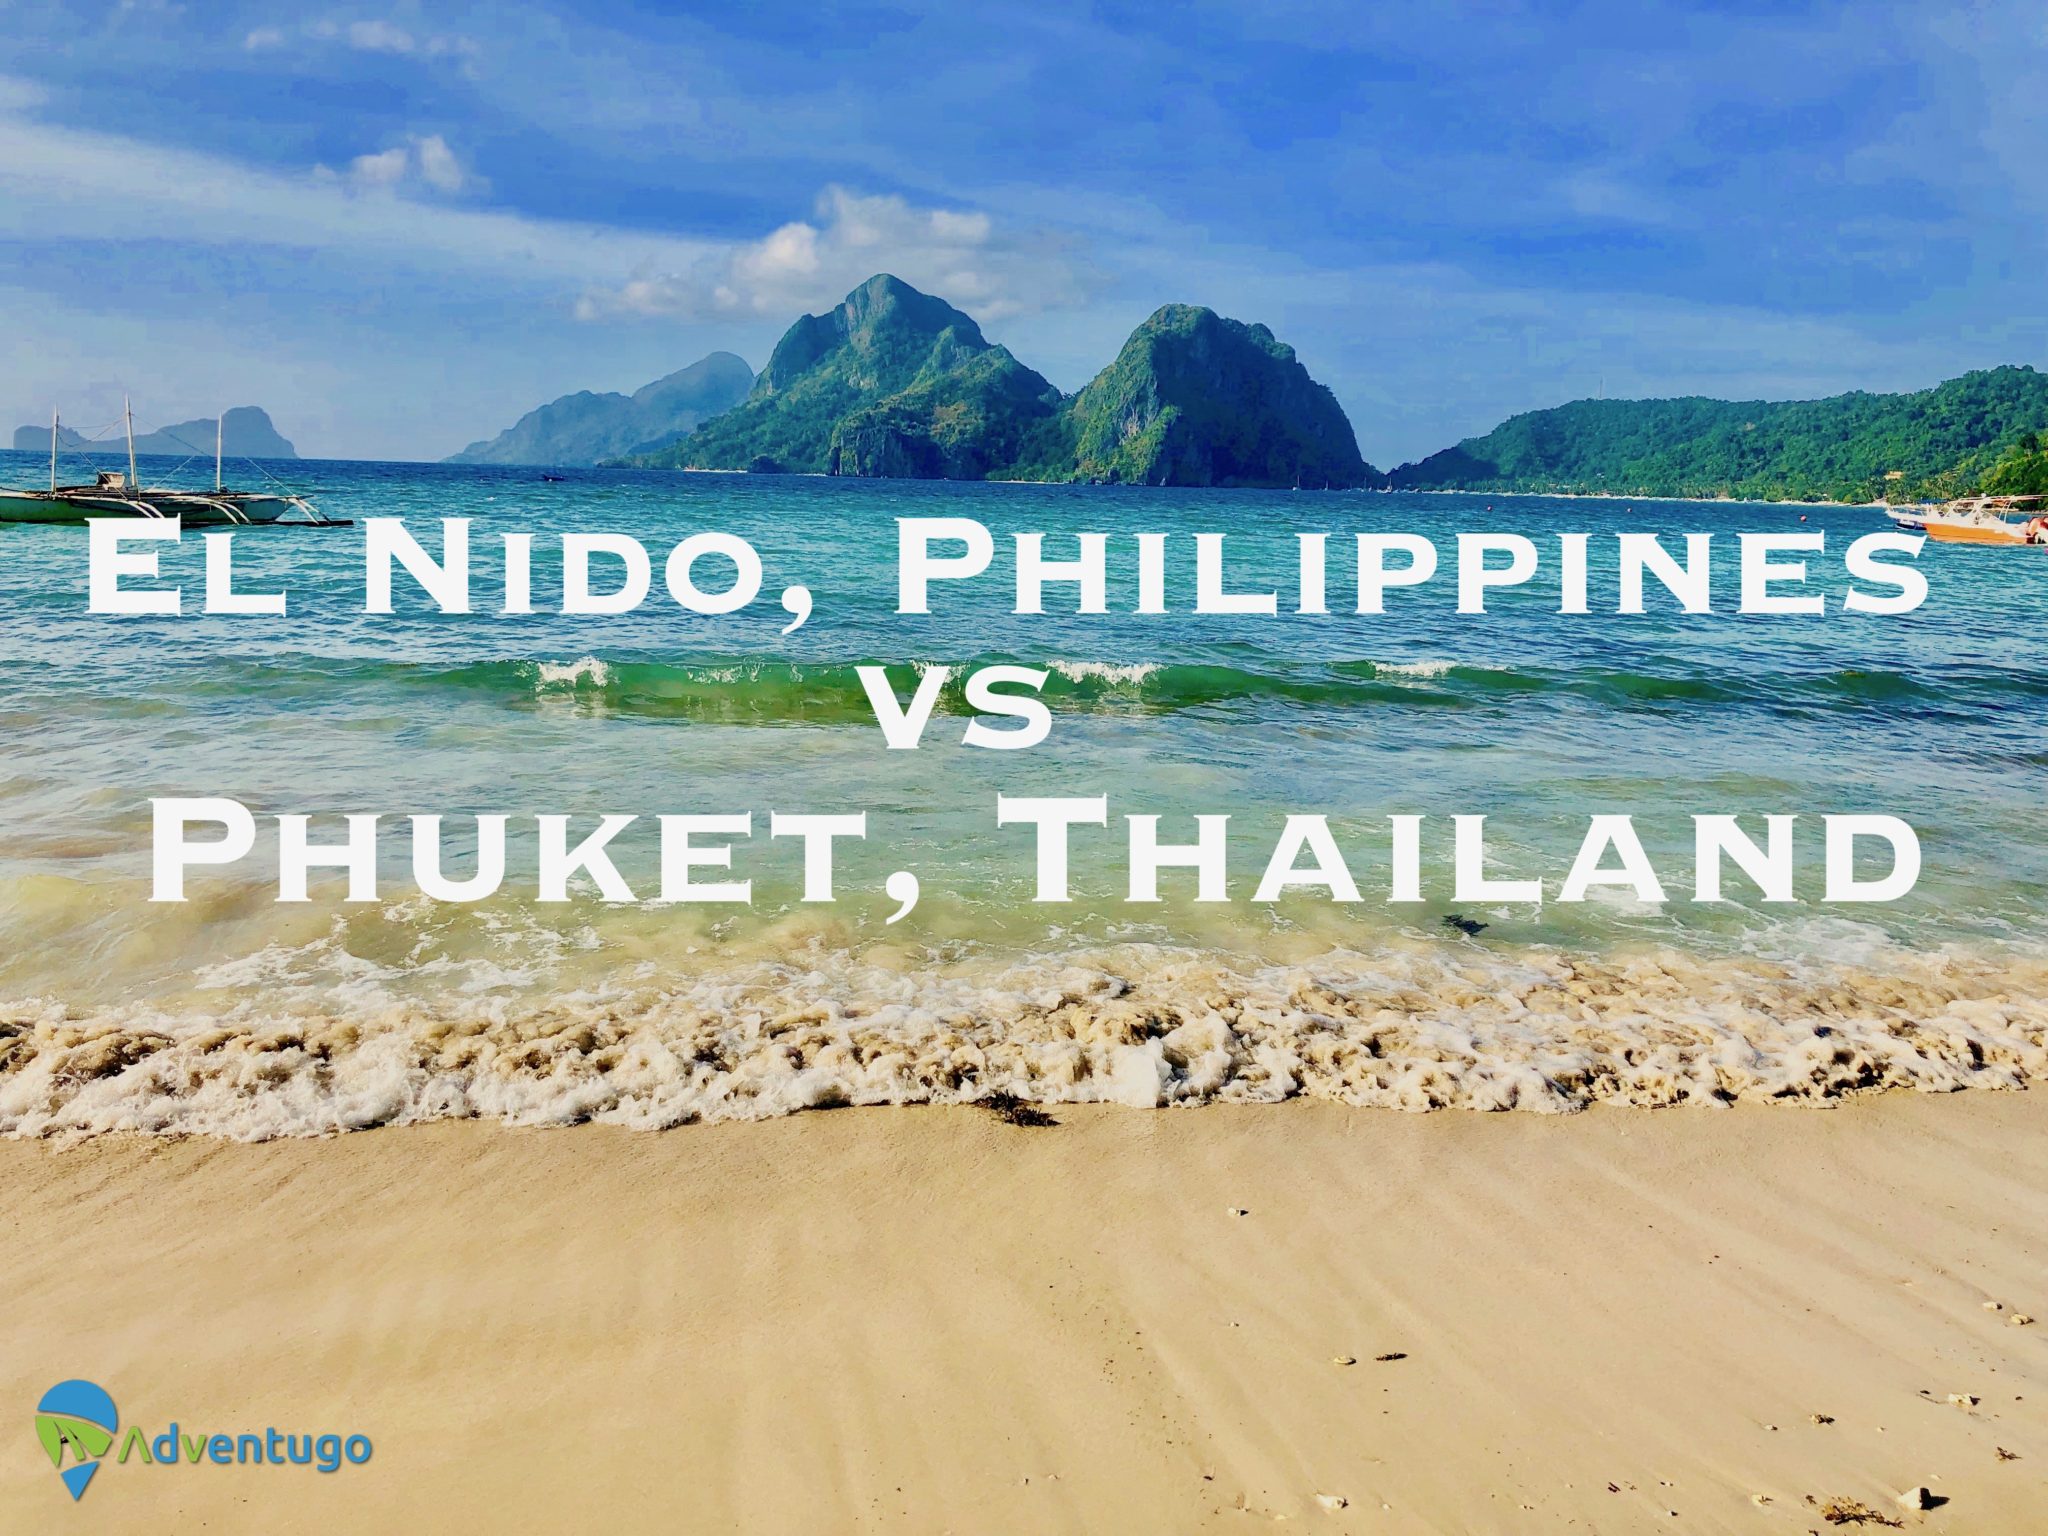 El Nido Philippines Vs Phuket Thailand. Which is better